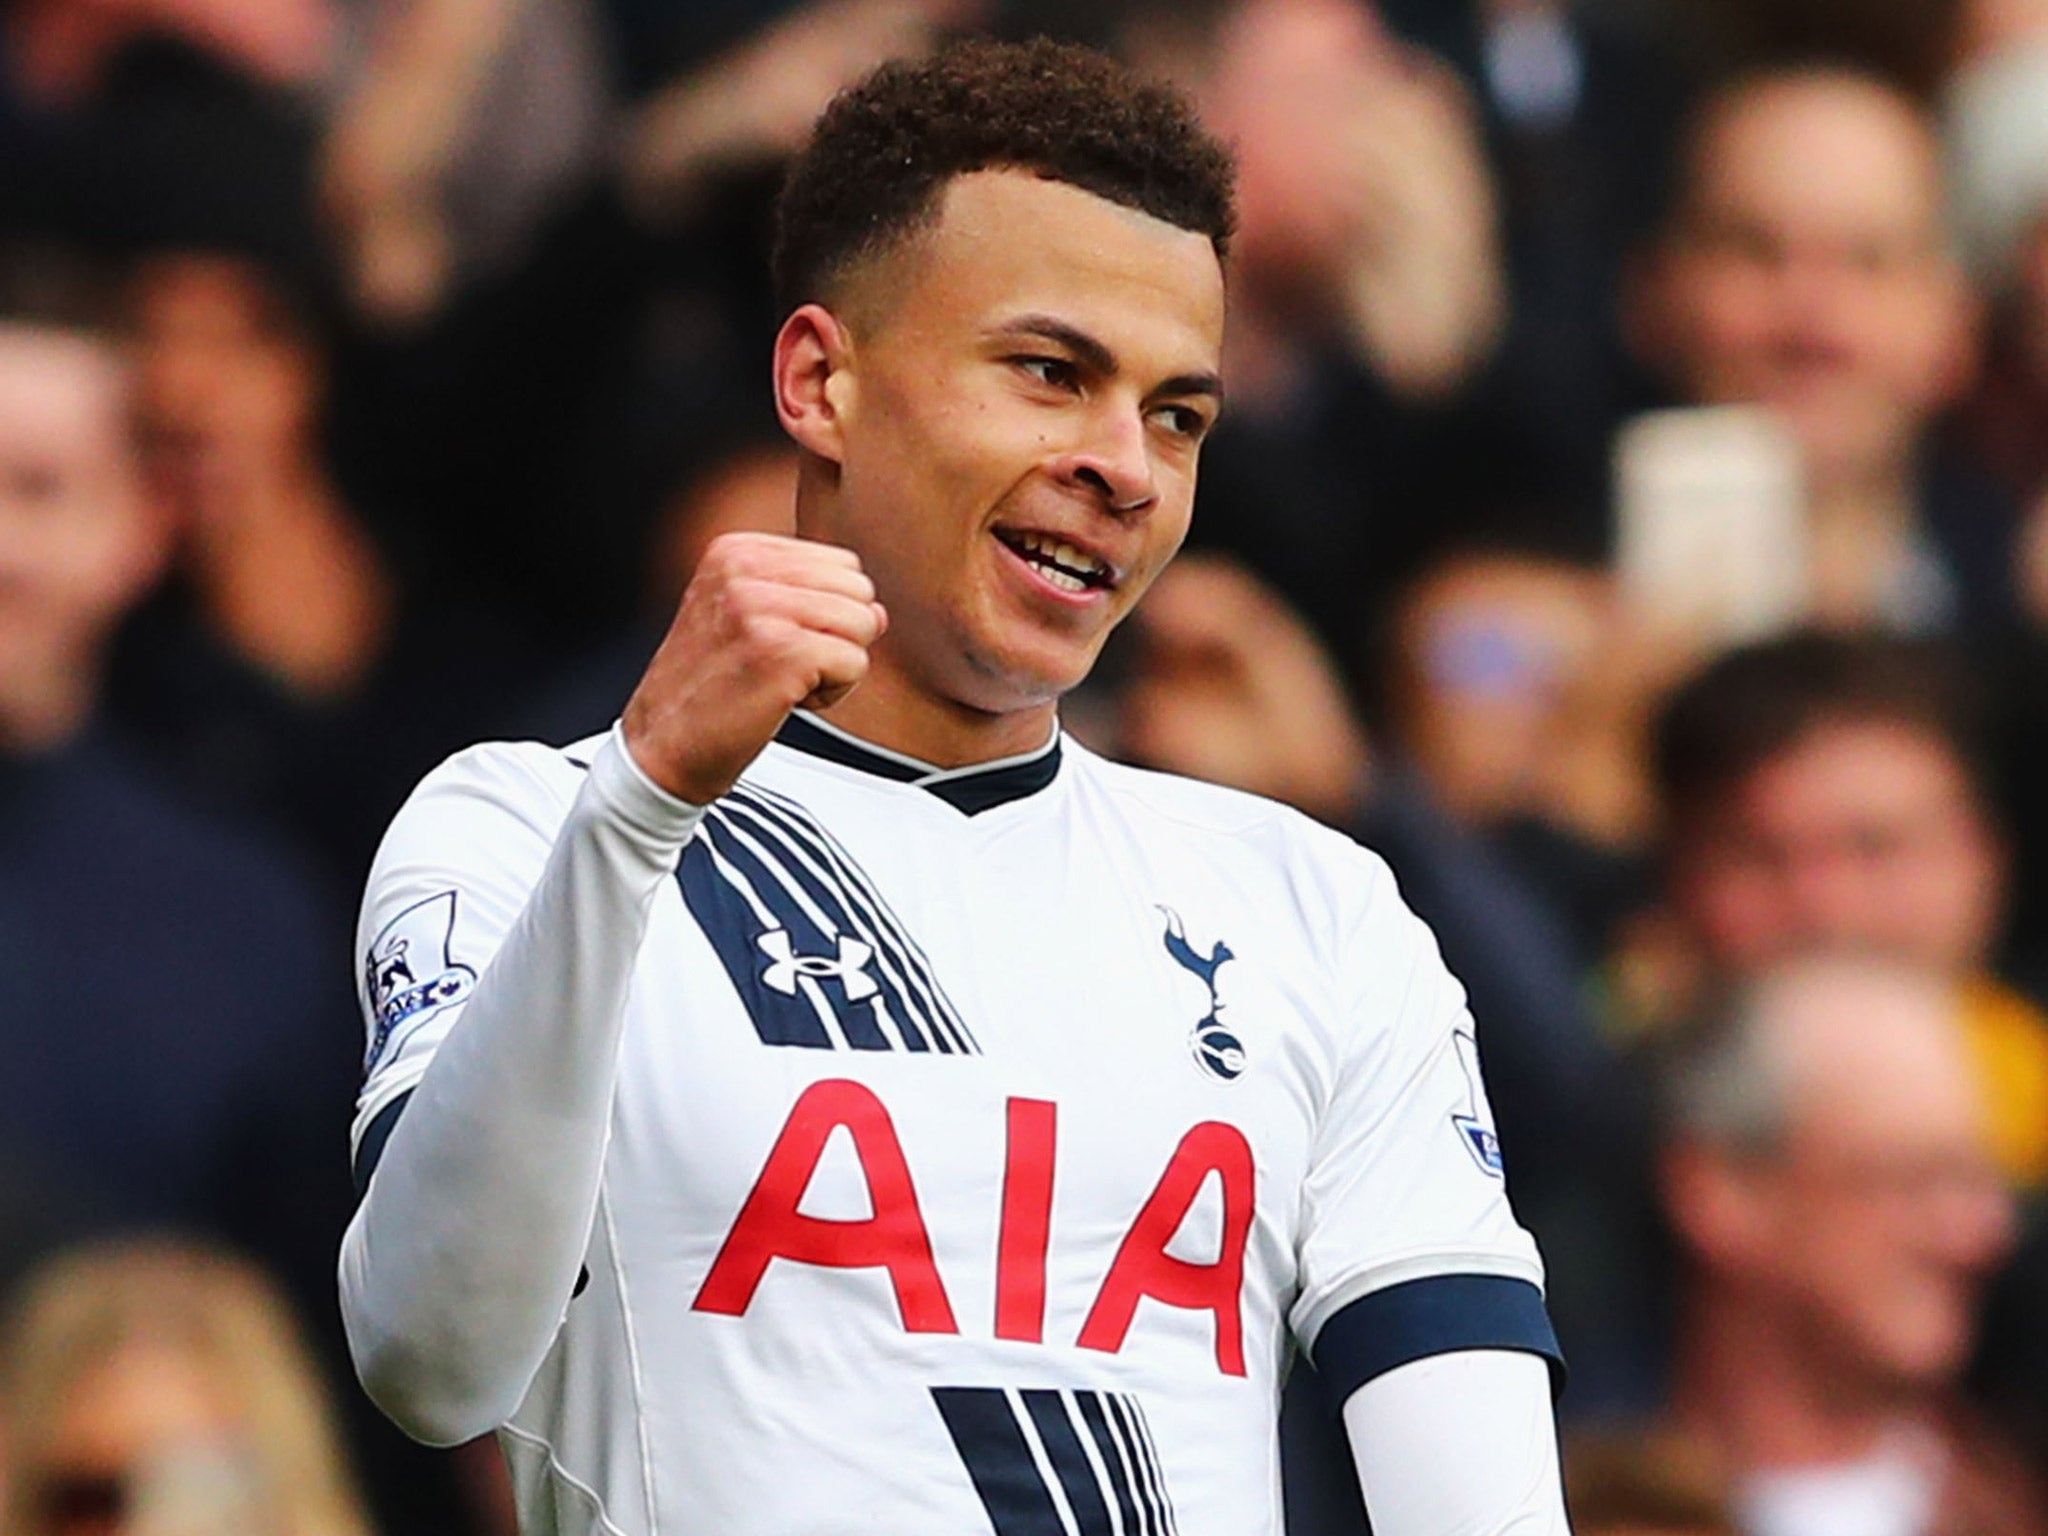 Tottenham midfielder Dele Alli has won the PFA Young Player of the Year award